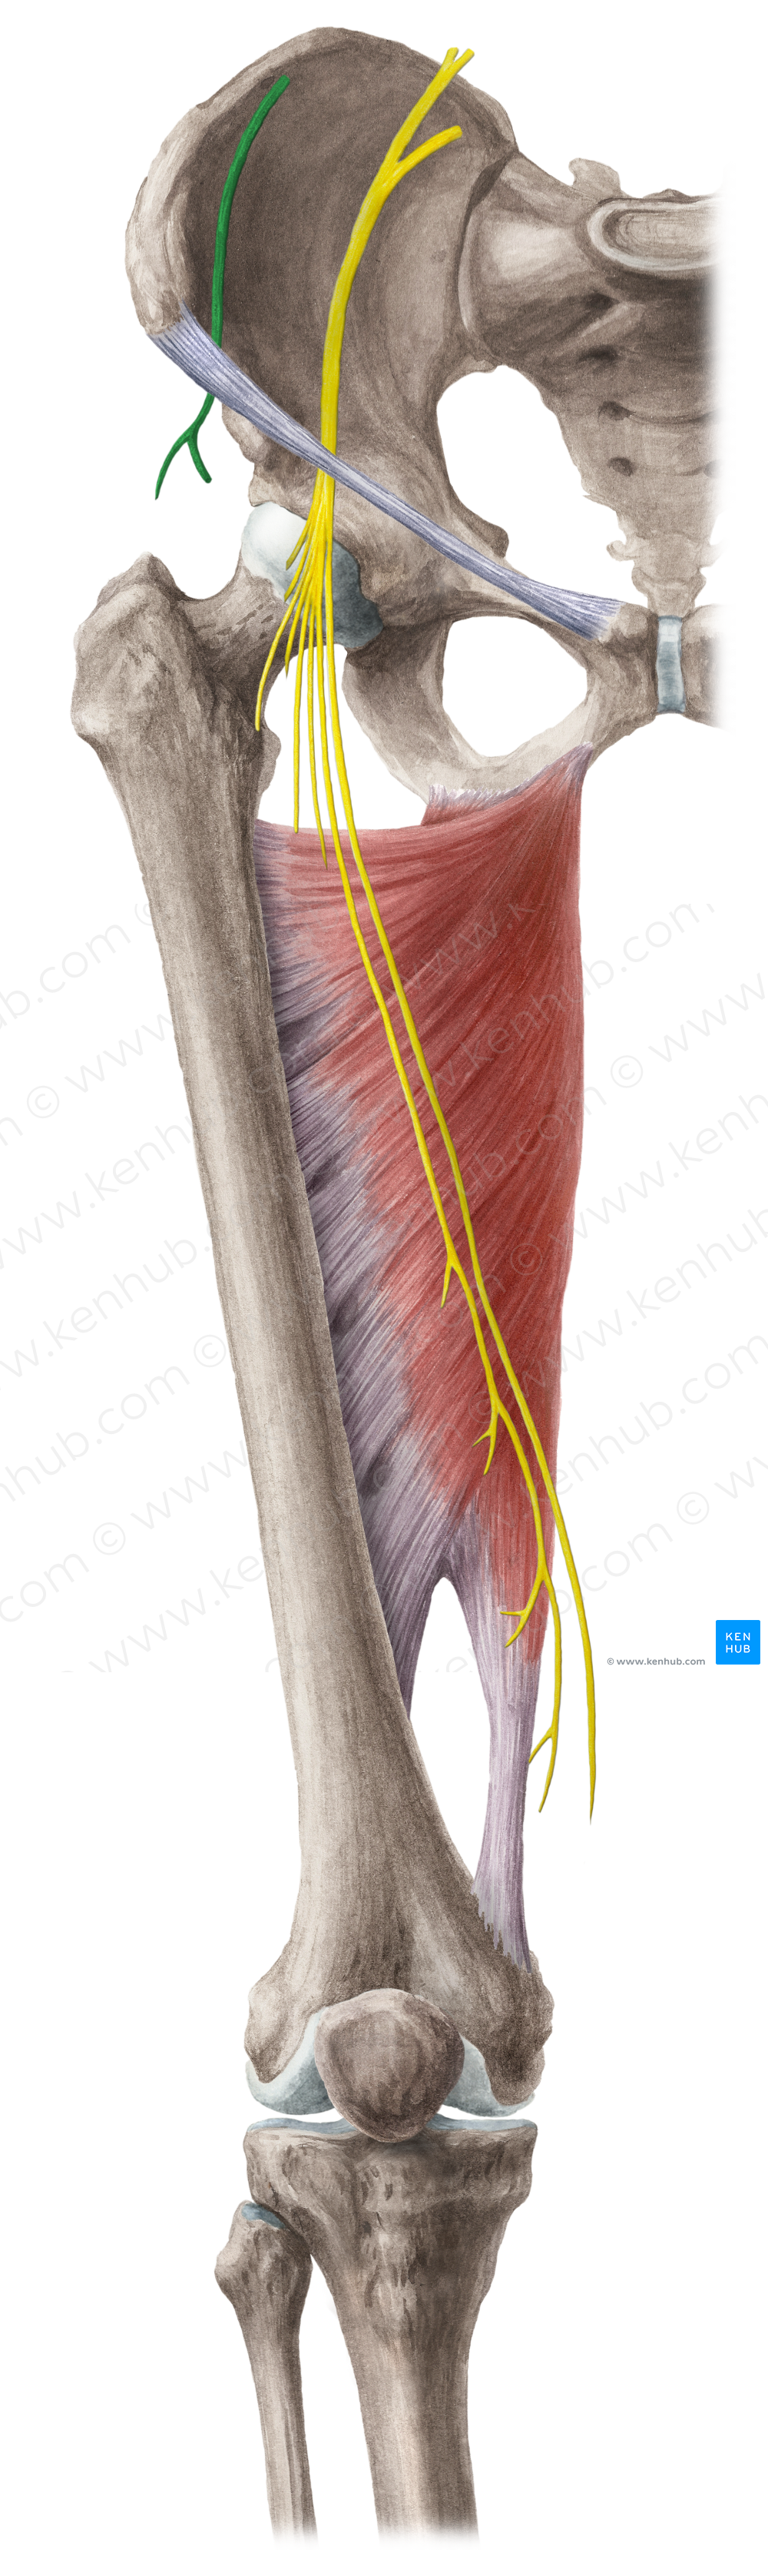 Lateral femoral cutaneous nerve (#6380)